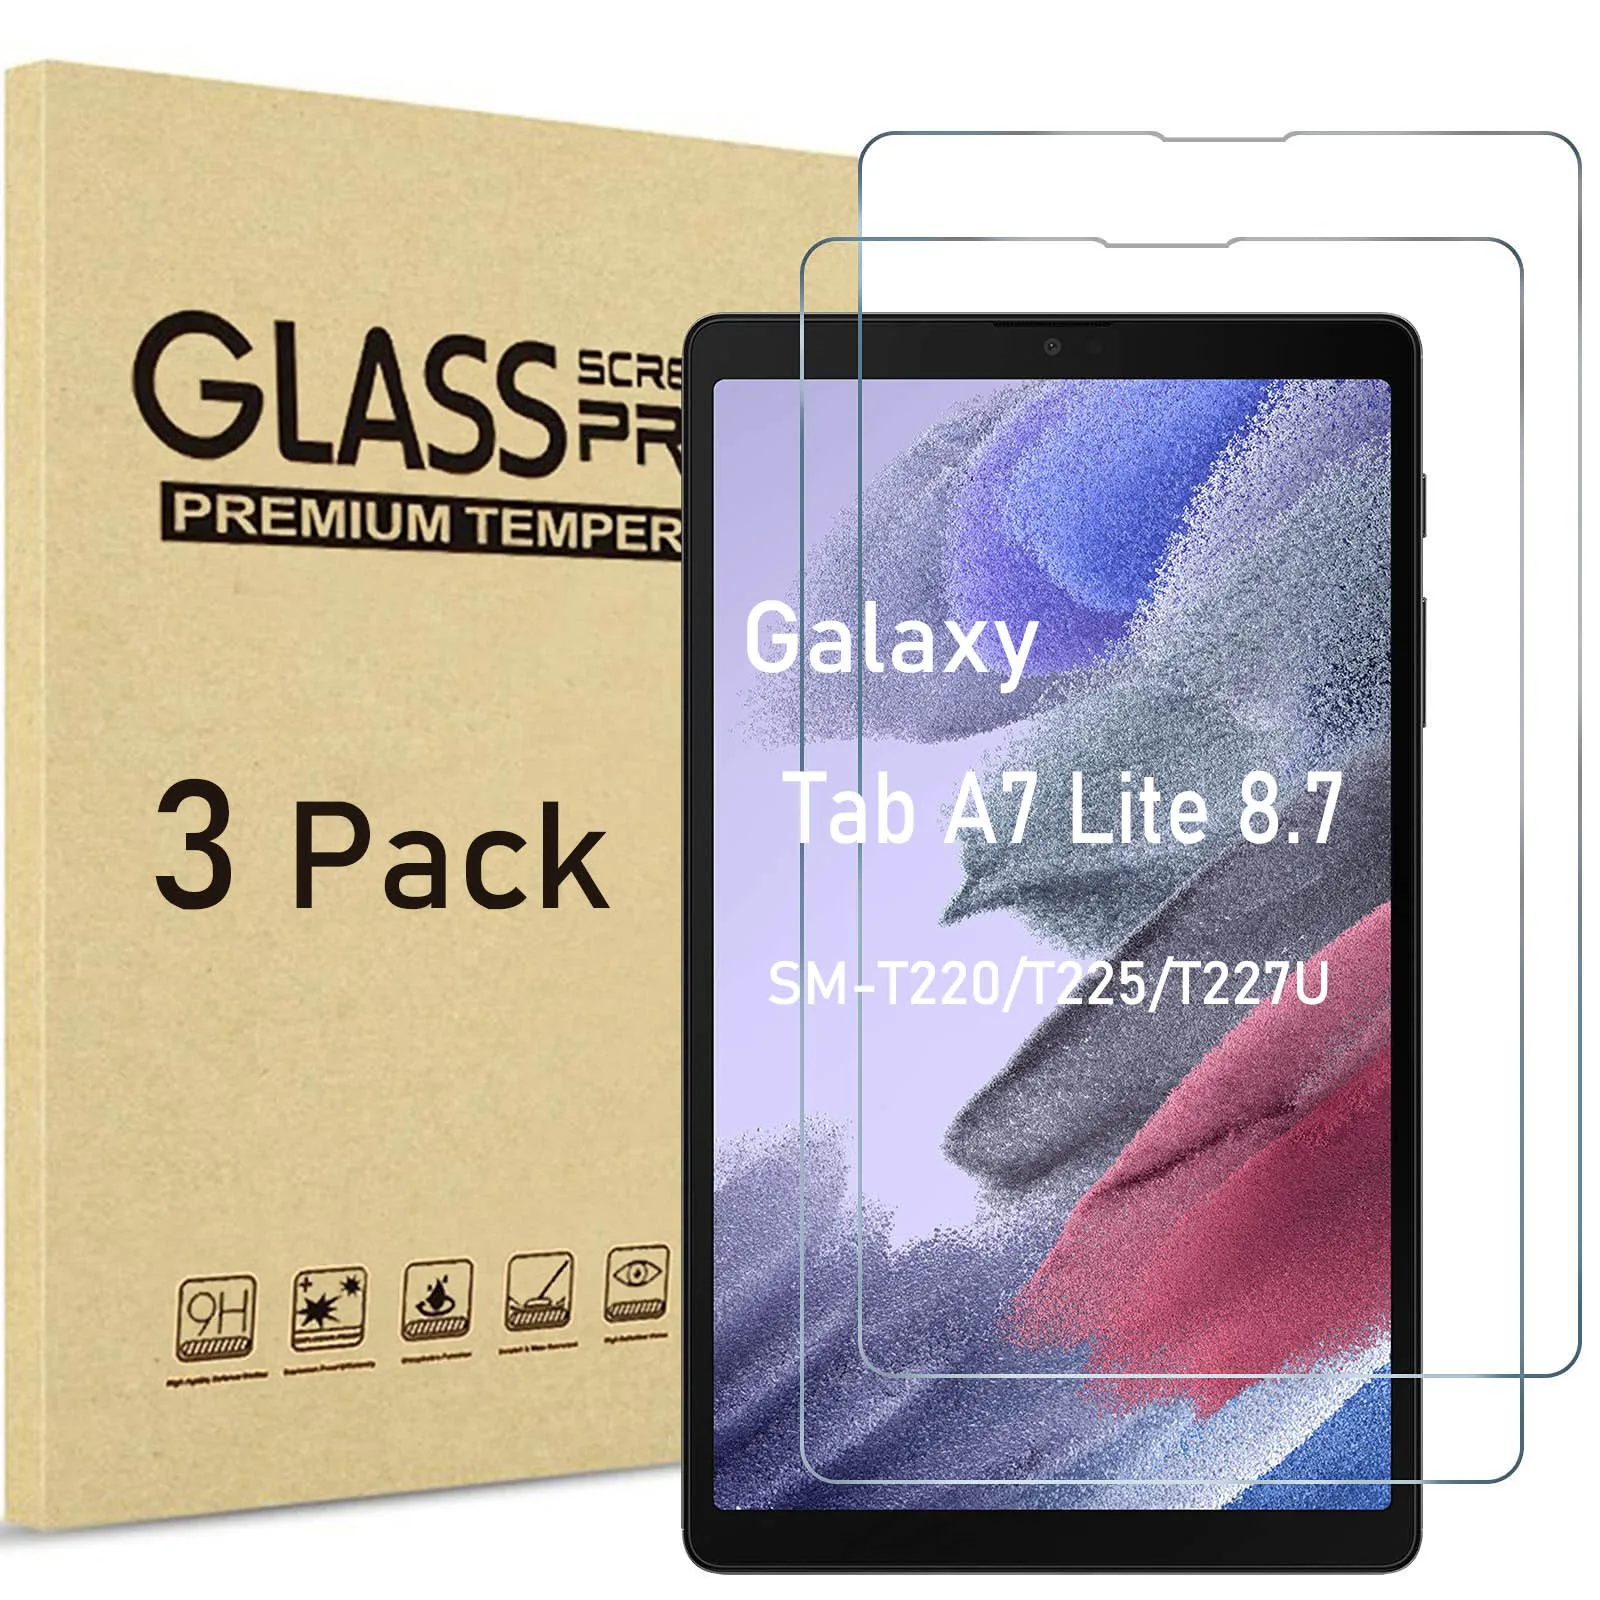 ( 3 Packs ) Tempered Glass For Samsung Galaxy Tab A7 Lite 8.7 2021 SM-T220  SM-T225 SM-T227U T220 Tablet Screen Protector Film